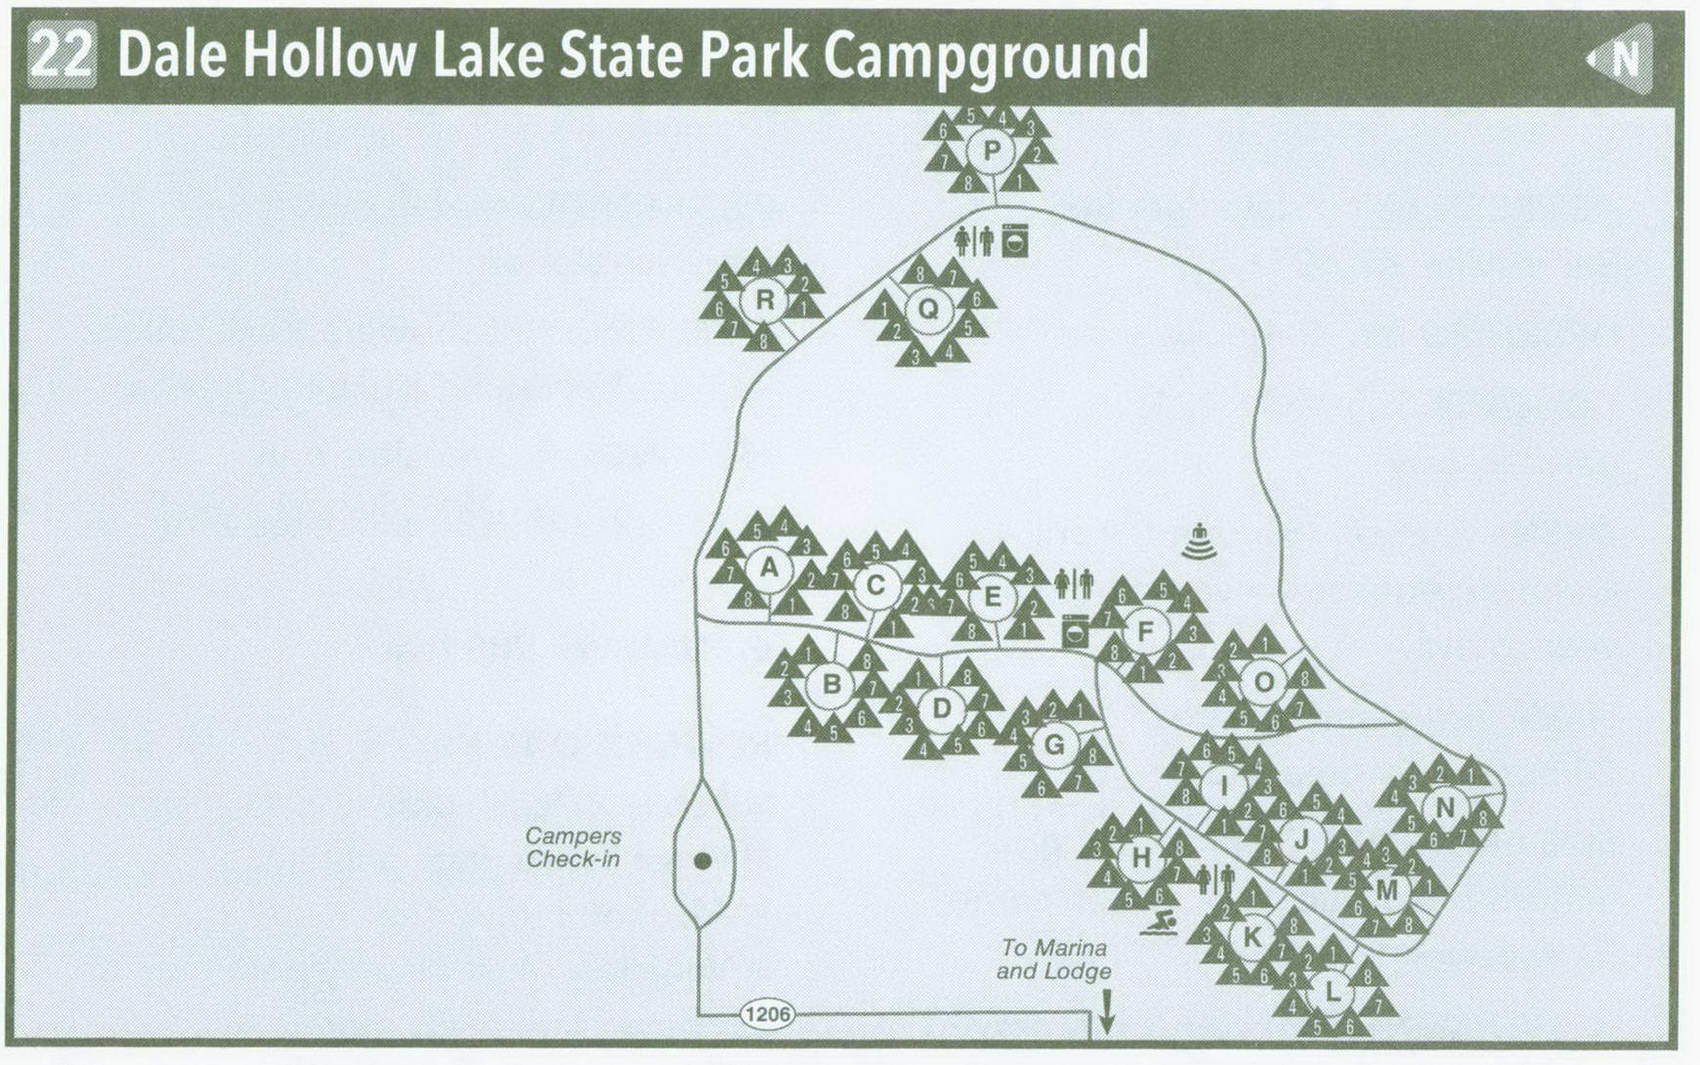 Plan of Dale Hollow Lake State Park Campground